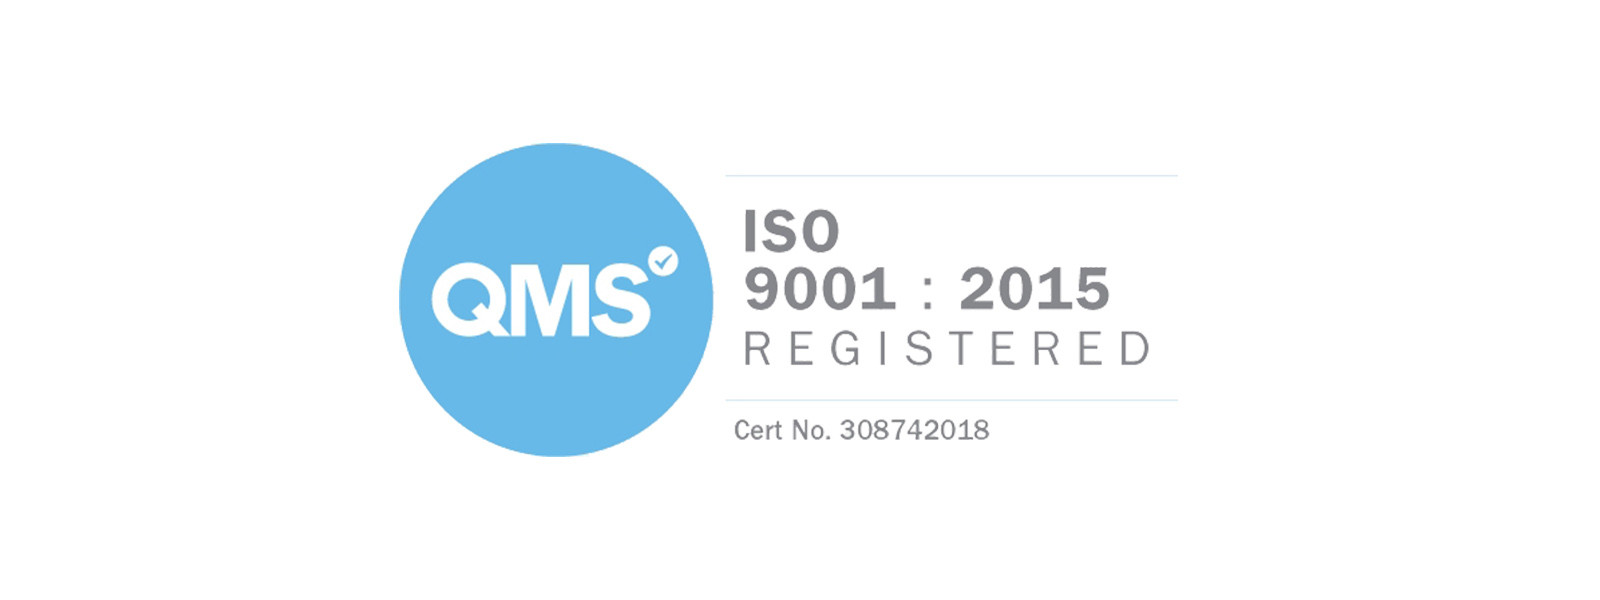 Bauromat Accredited With ISO-9001